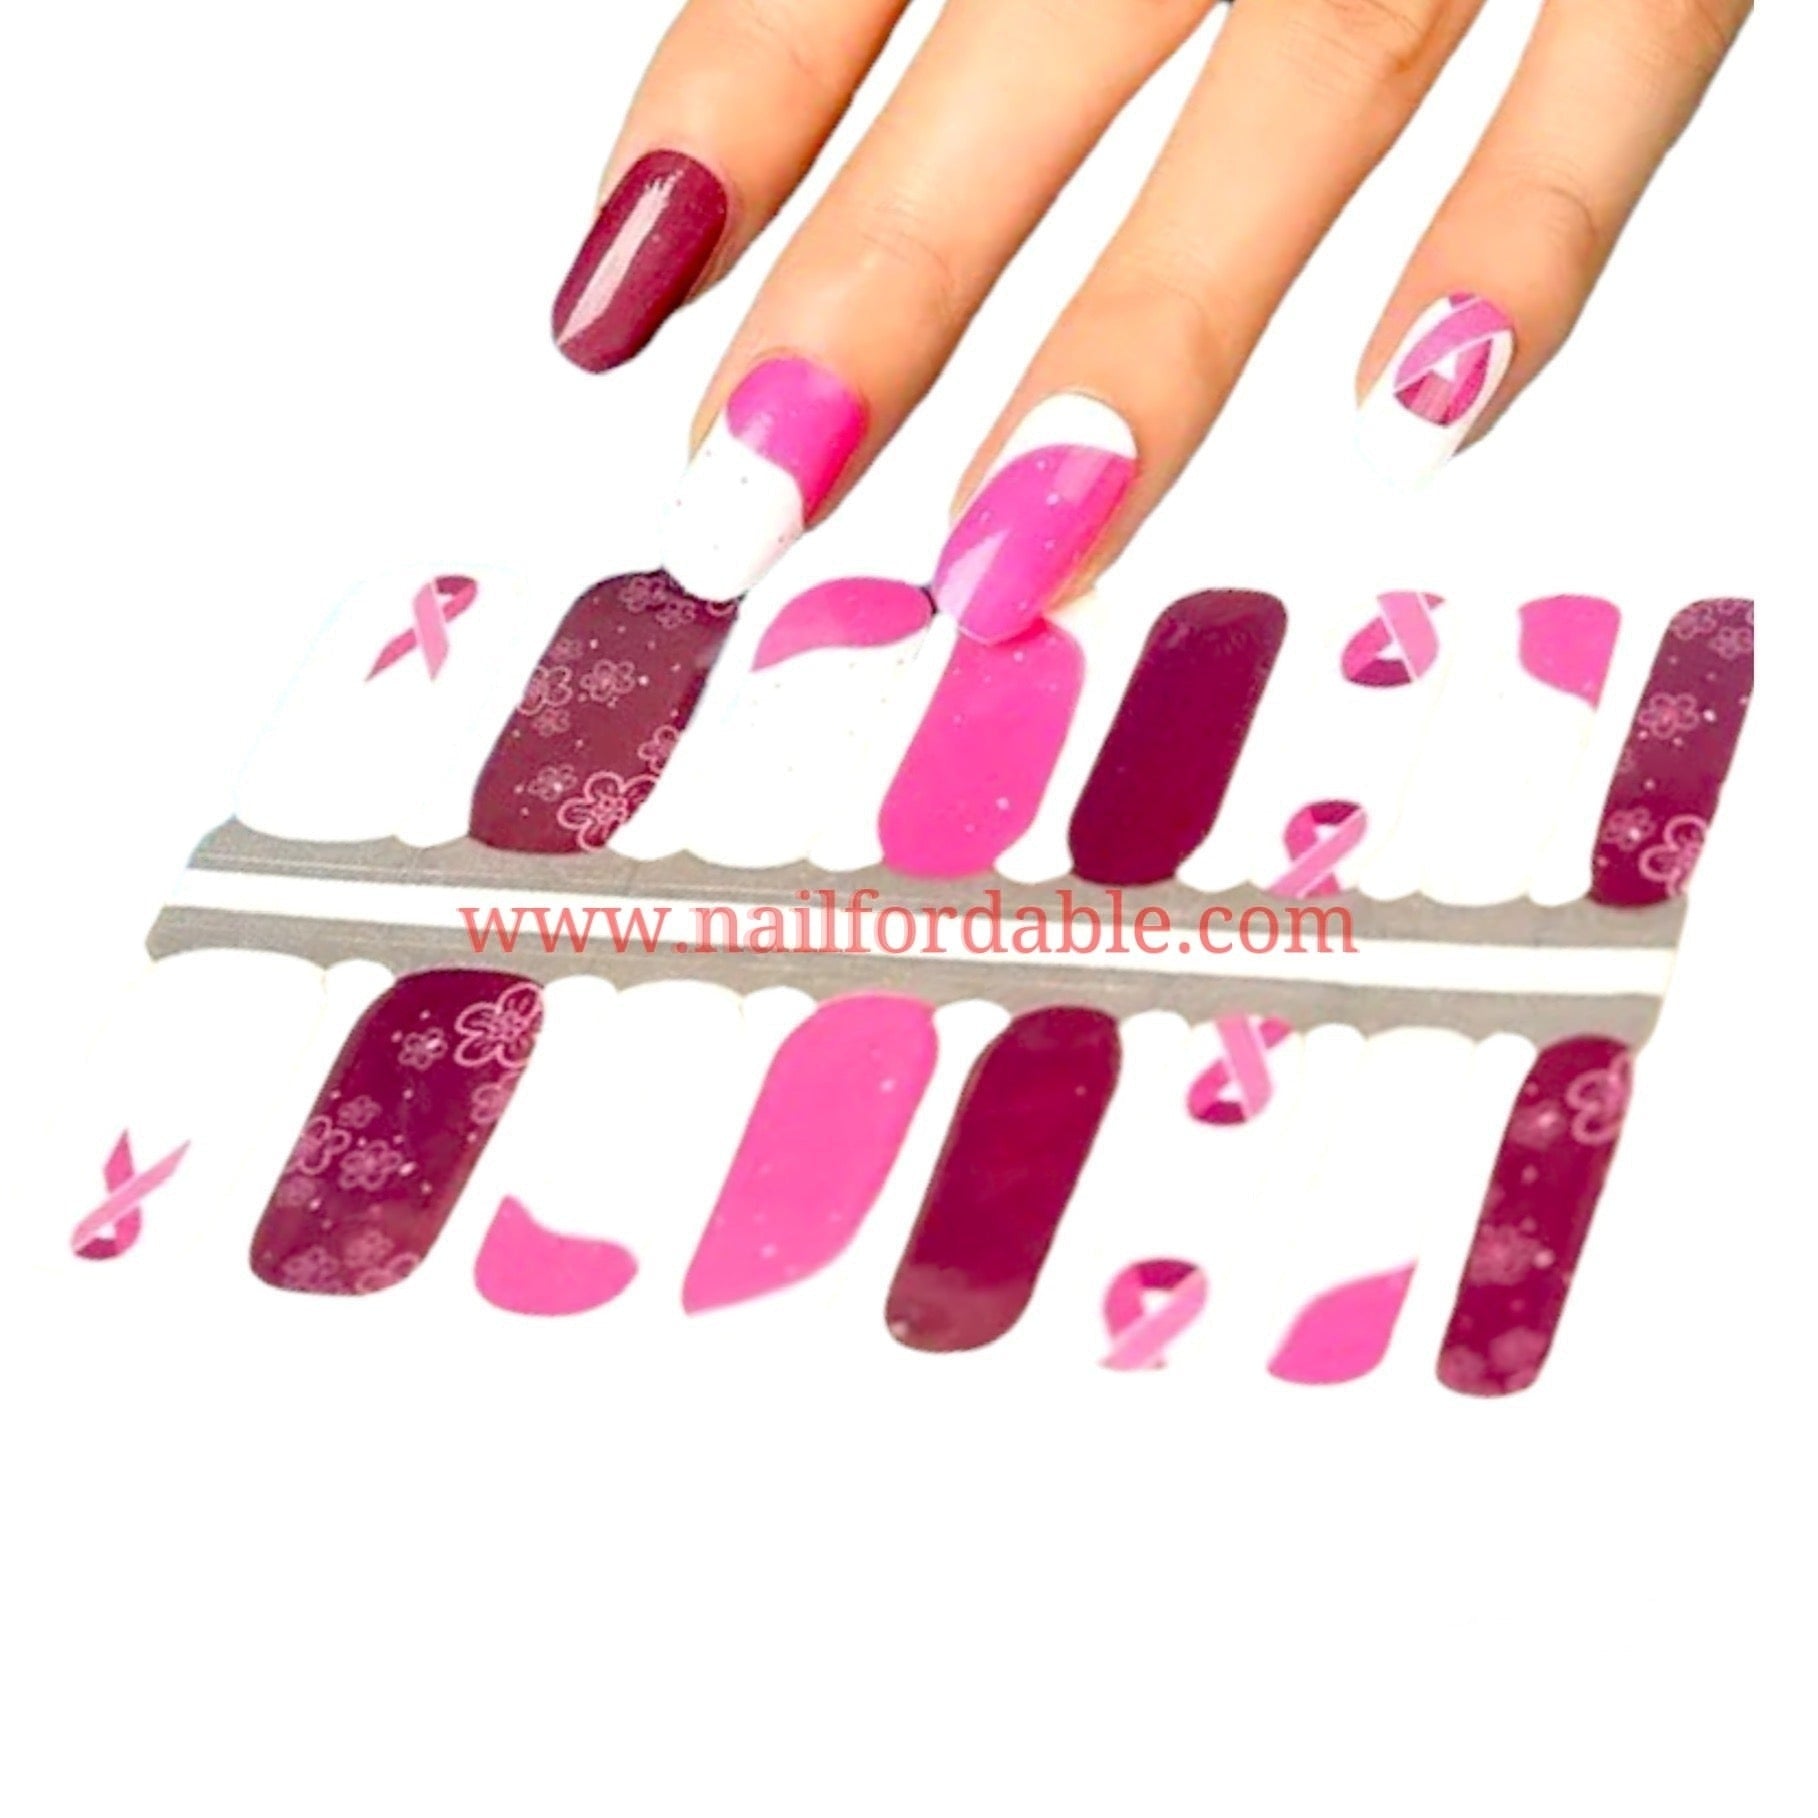 Breast Cancer awareness Nail Wraps | Semi Cured Gel Wraps | Gel Nail Wraps |Nail Polish | Nail Stickers